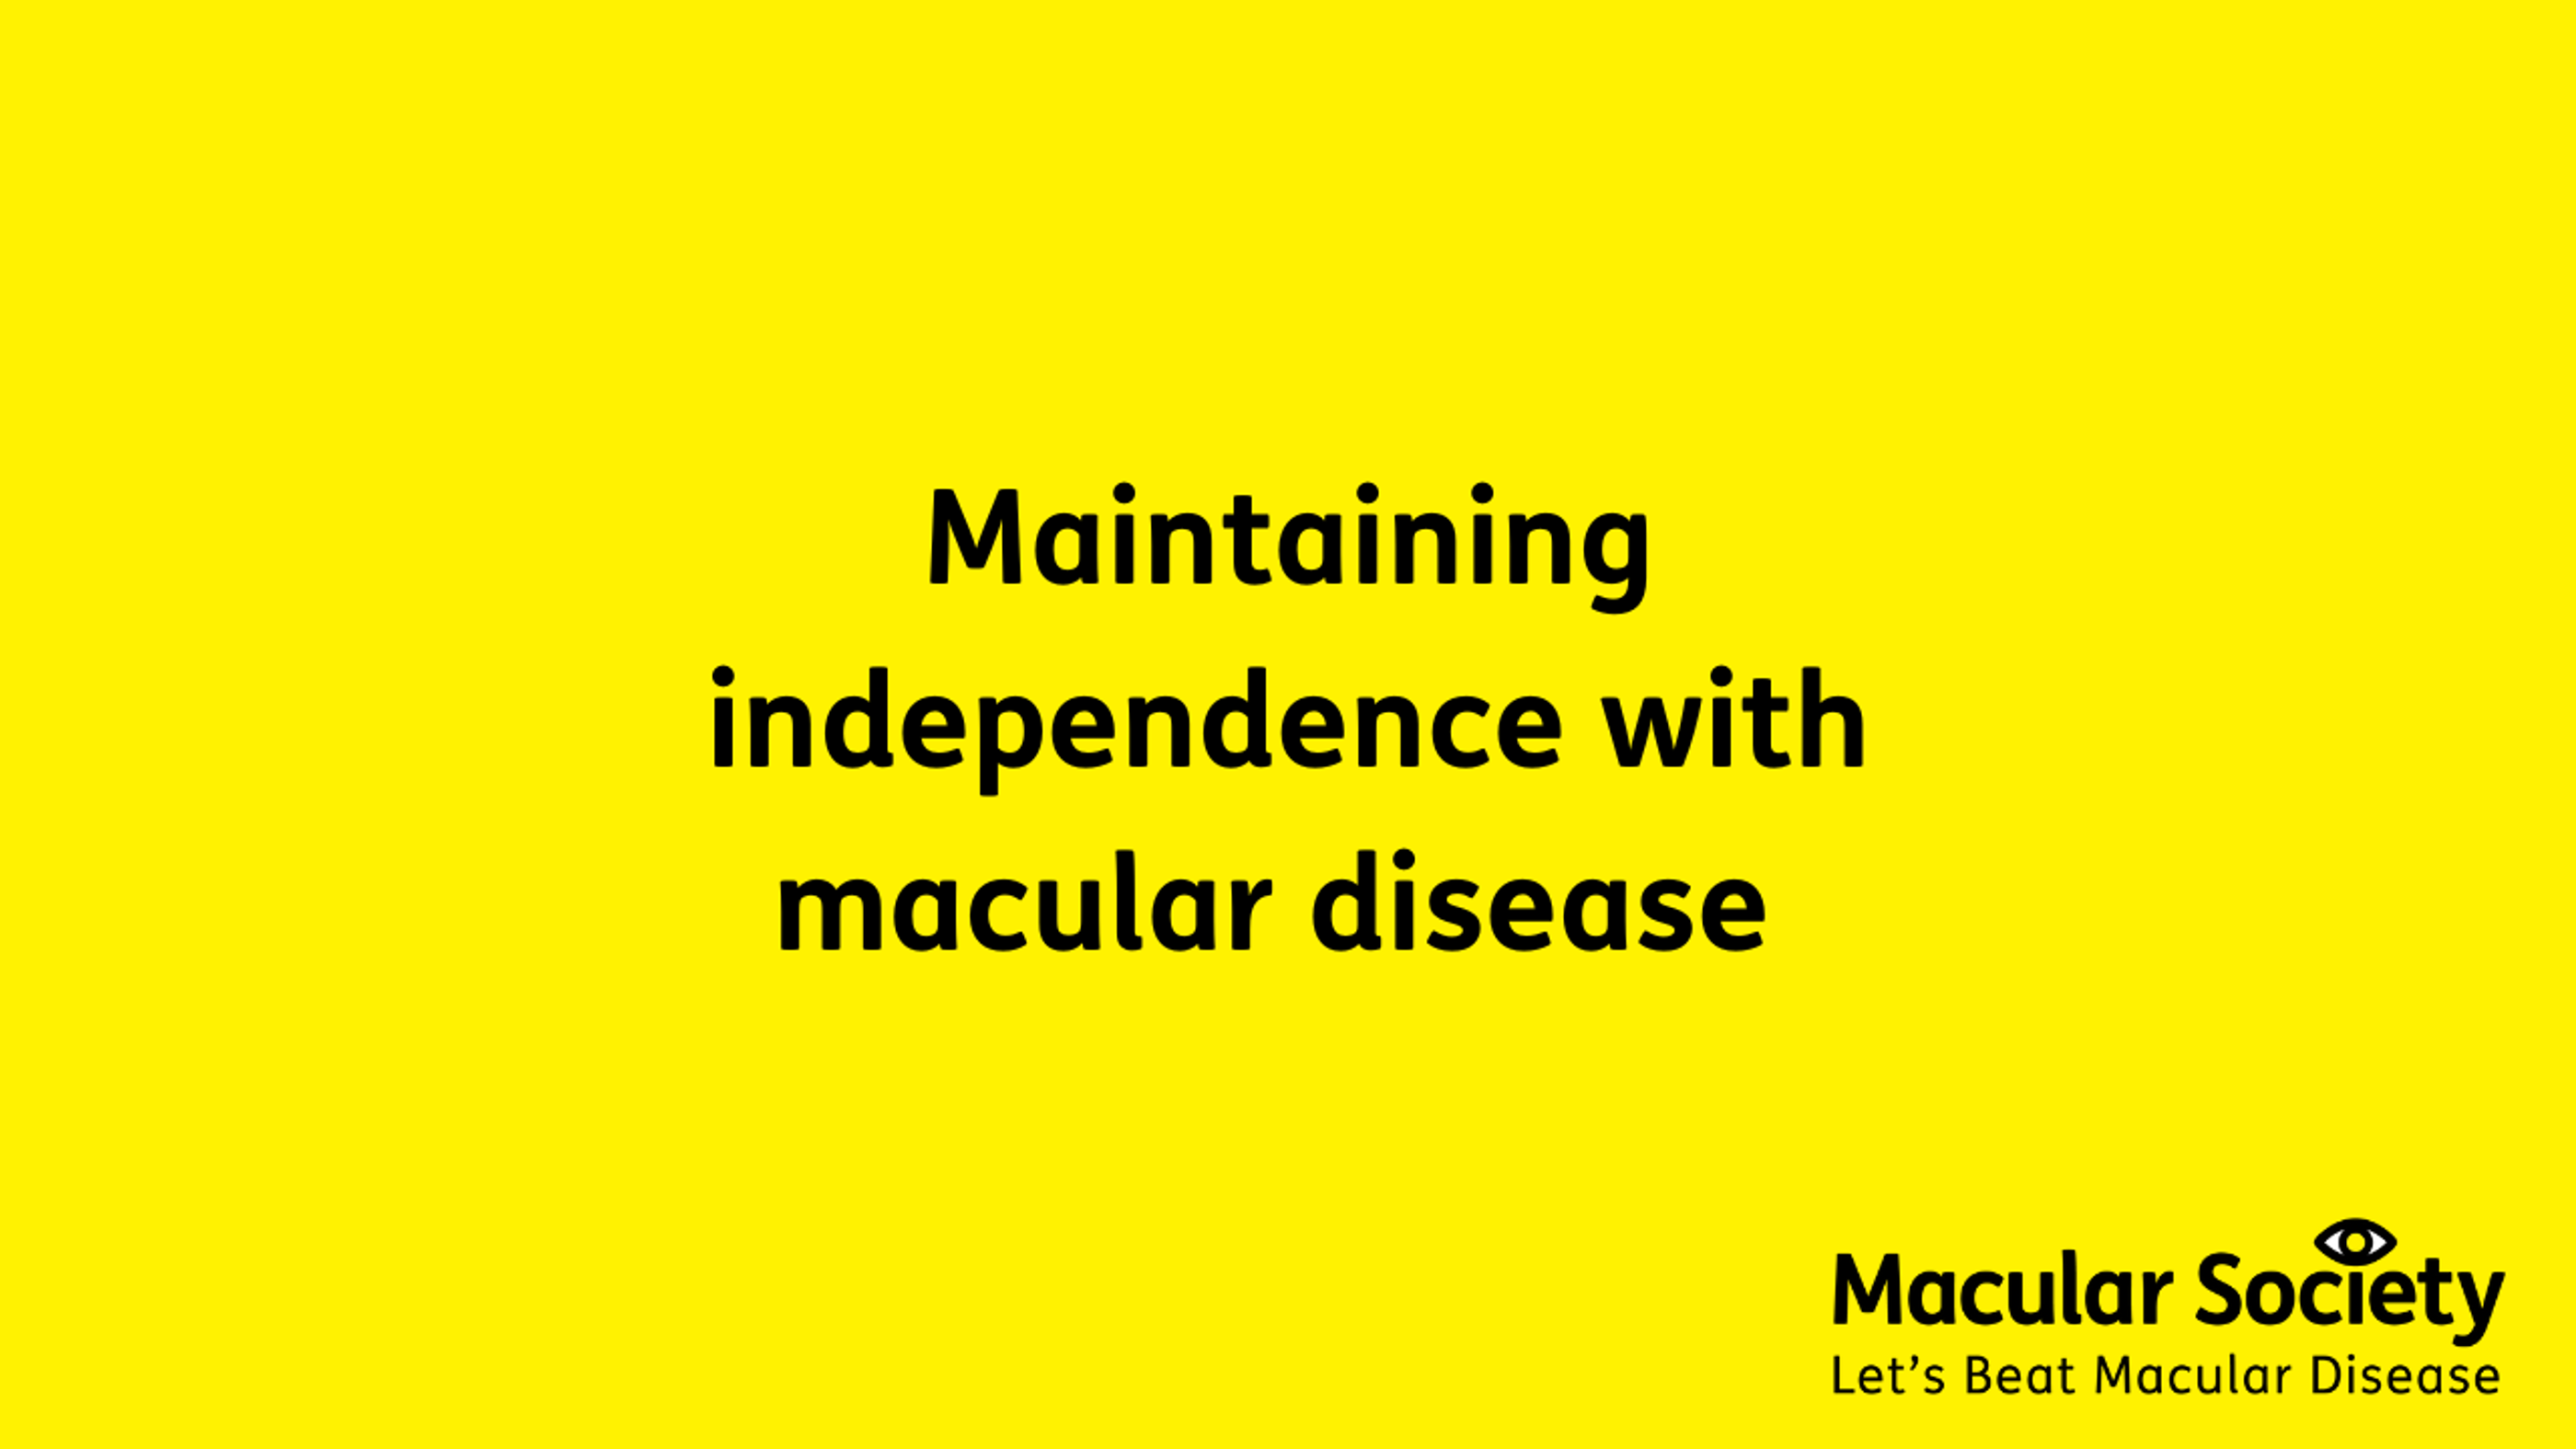 Maintaining independence with macular disease webinar